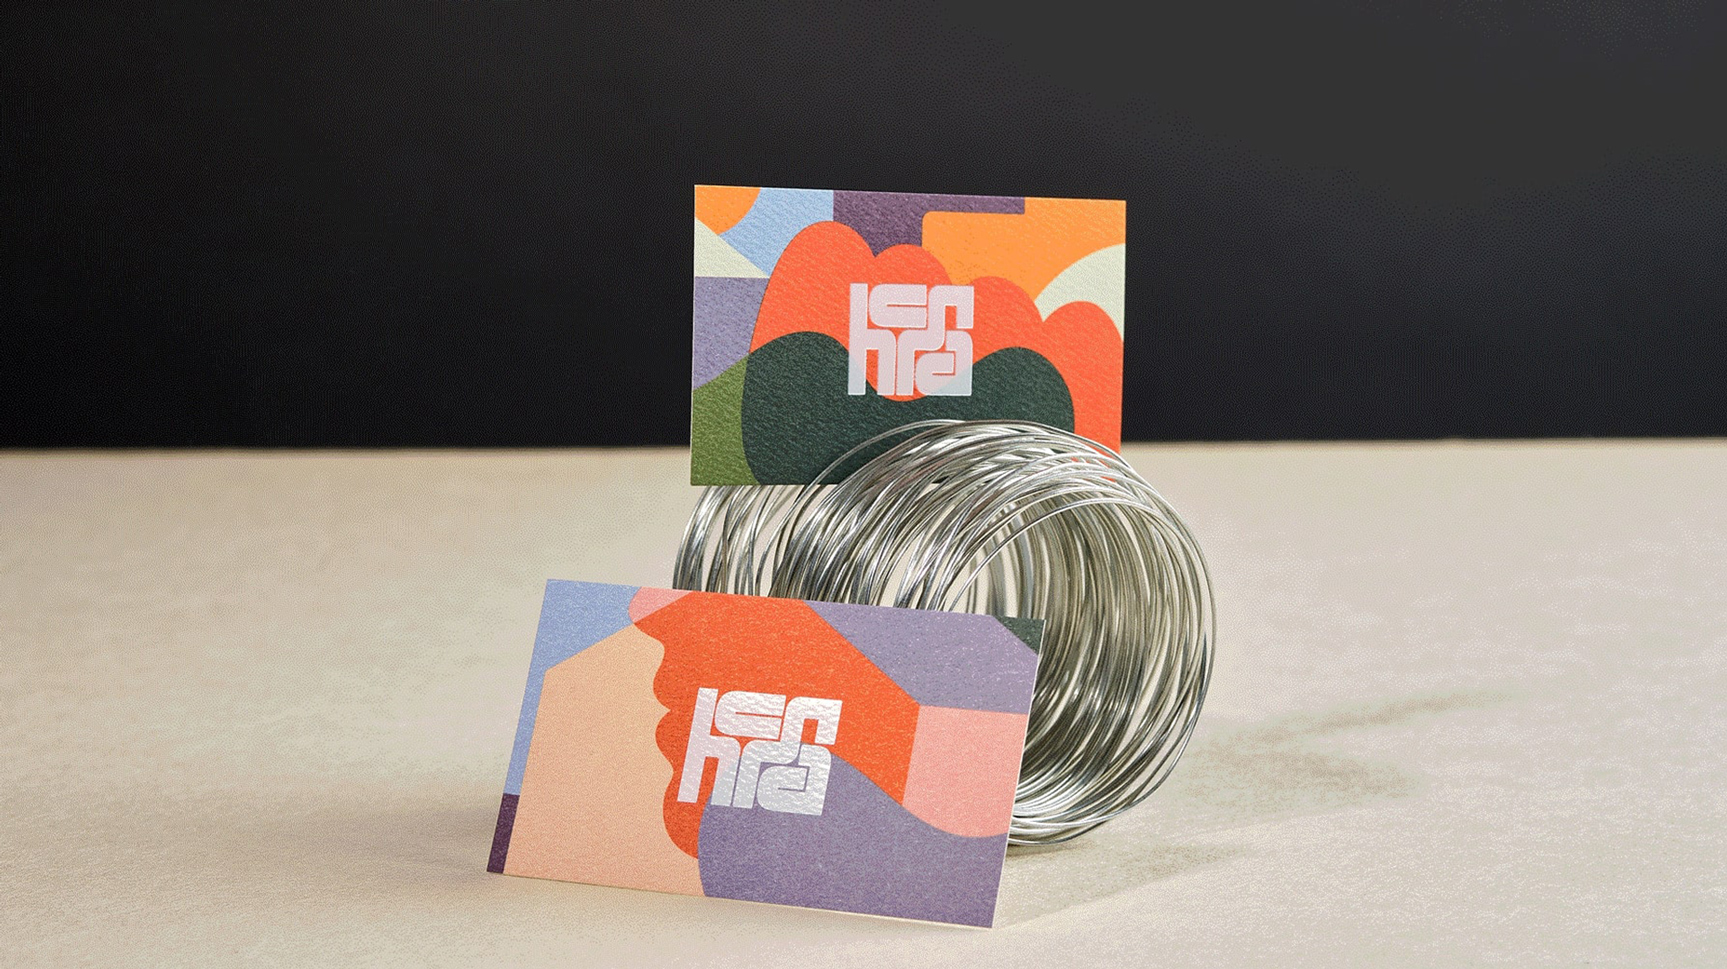 Two HCMA business cards utilizing different patterns of organic/colourful shapes each time.